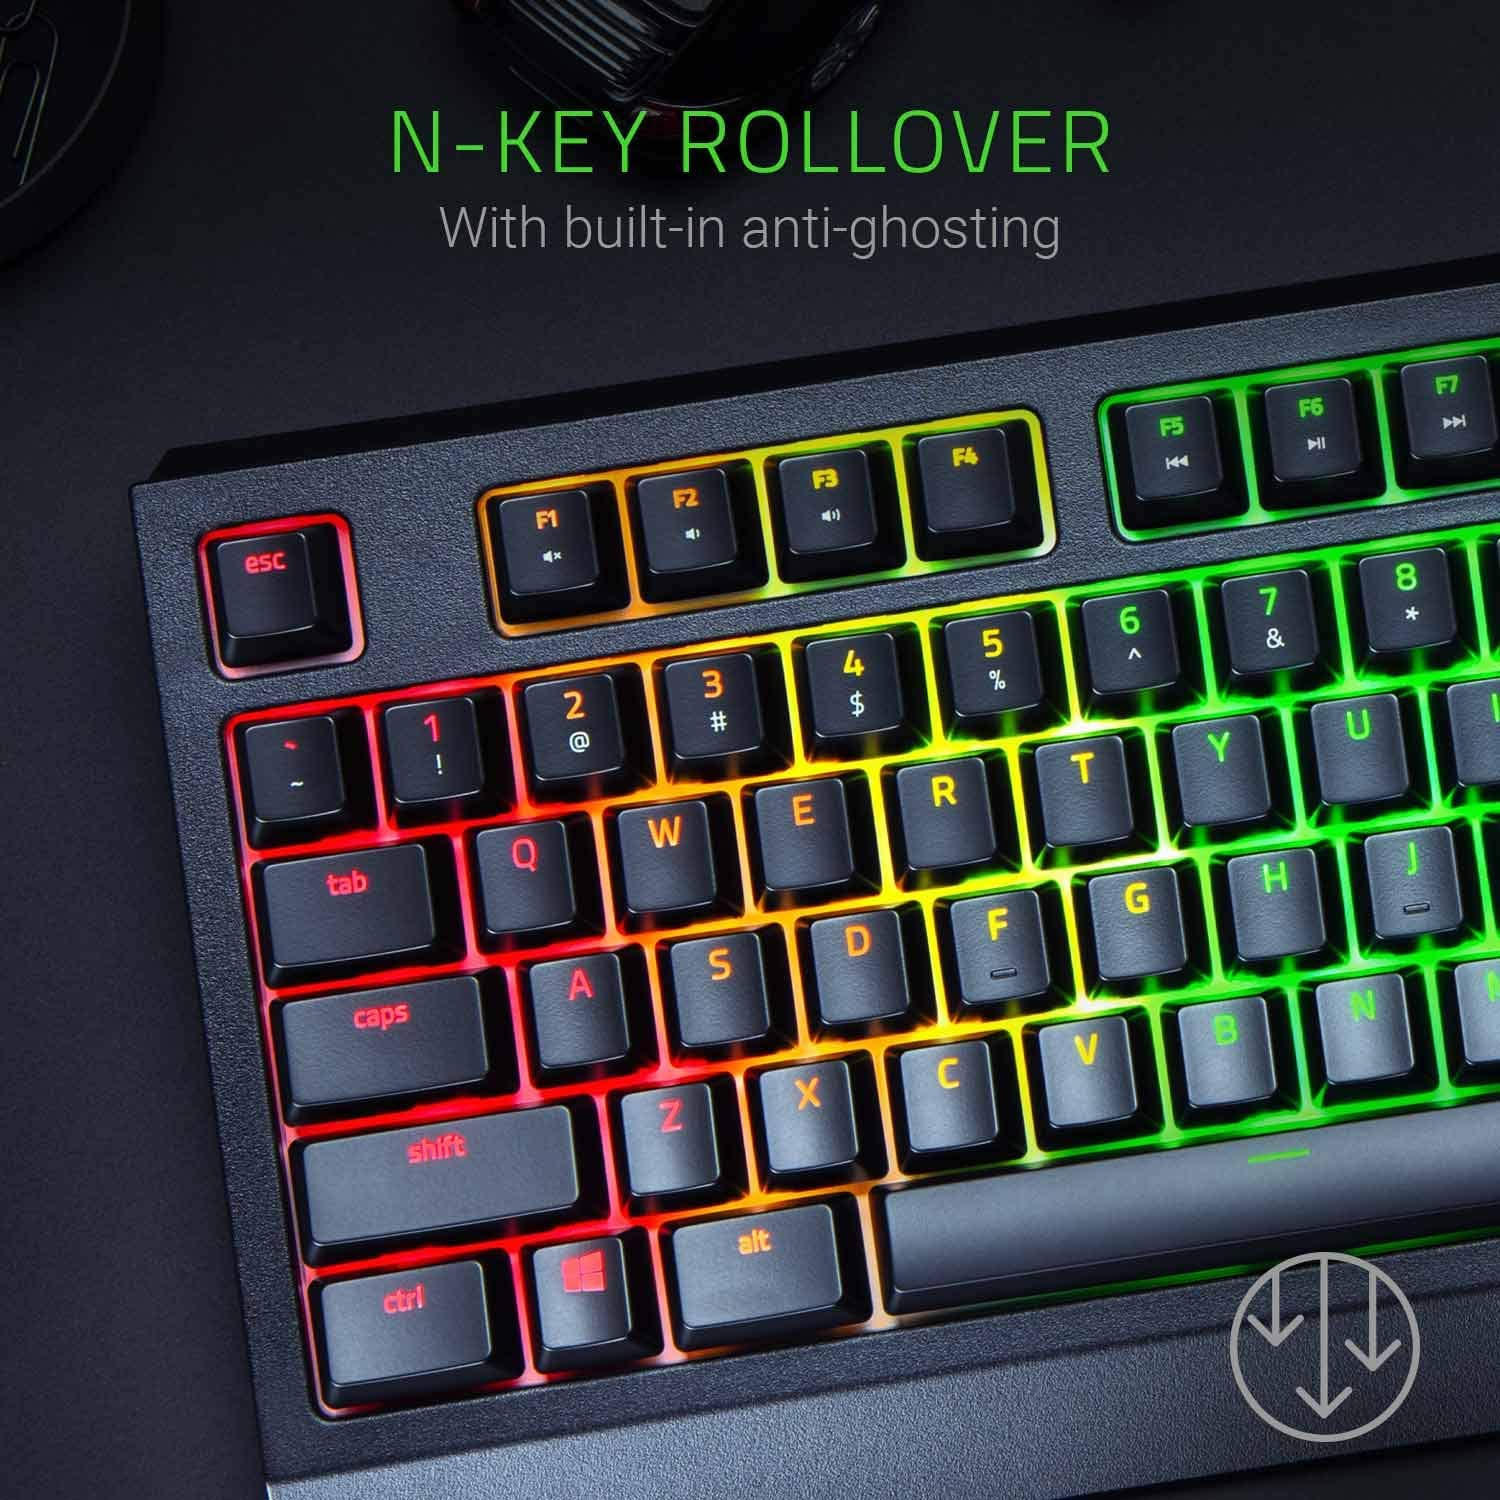 The anti-ghosting feature of gaming keyboards ensures that each key is registered when multiple keys are pressed together. 